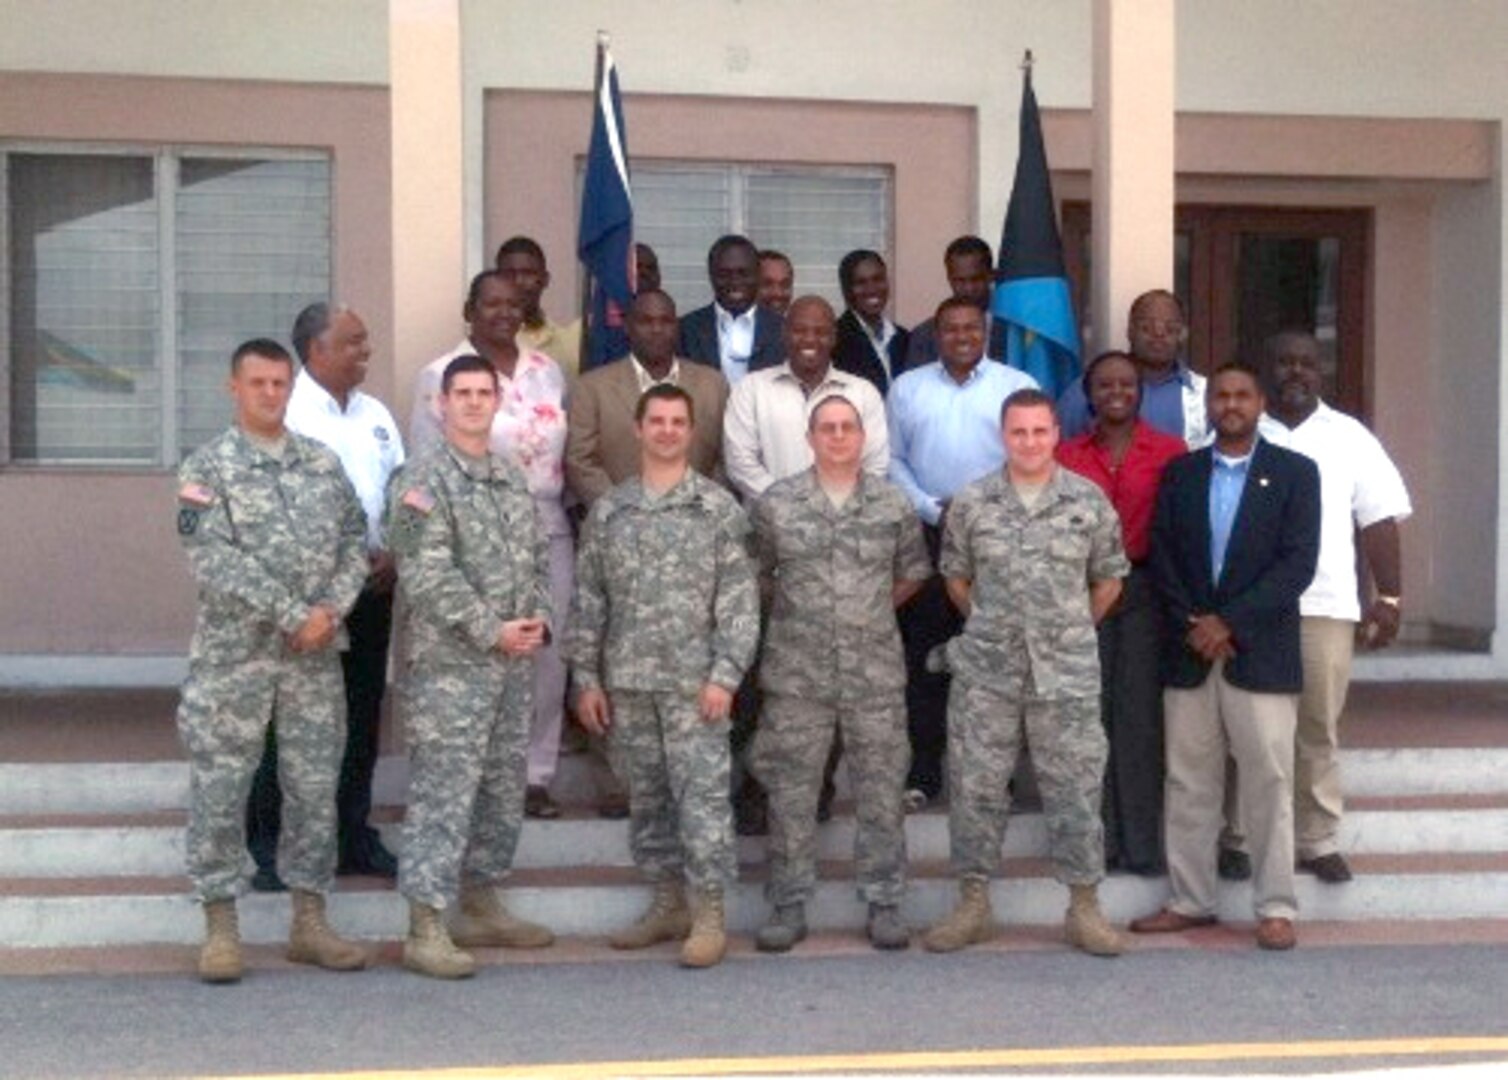 Rhode Island National Guard workshop facilitators from left to right, Chief Warrant Officer 3 Paul Pion, Capt. Jeff Lessard, Maj. Alan White, Master Sgt. Stephen Chasse and Master Sgt. Mark Larsen, pose for a photo with participants from the Royal Bahamas Police and Defense Forces.